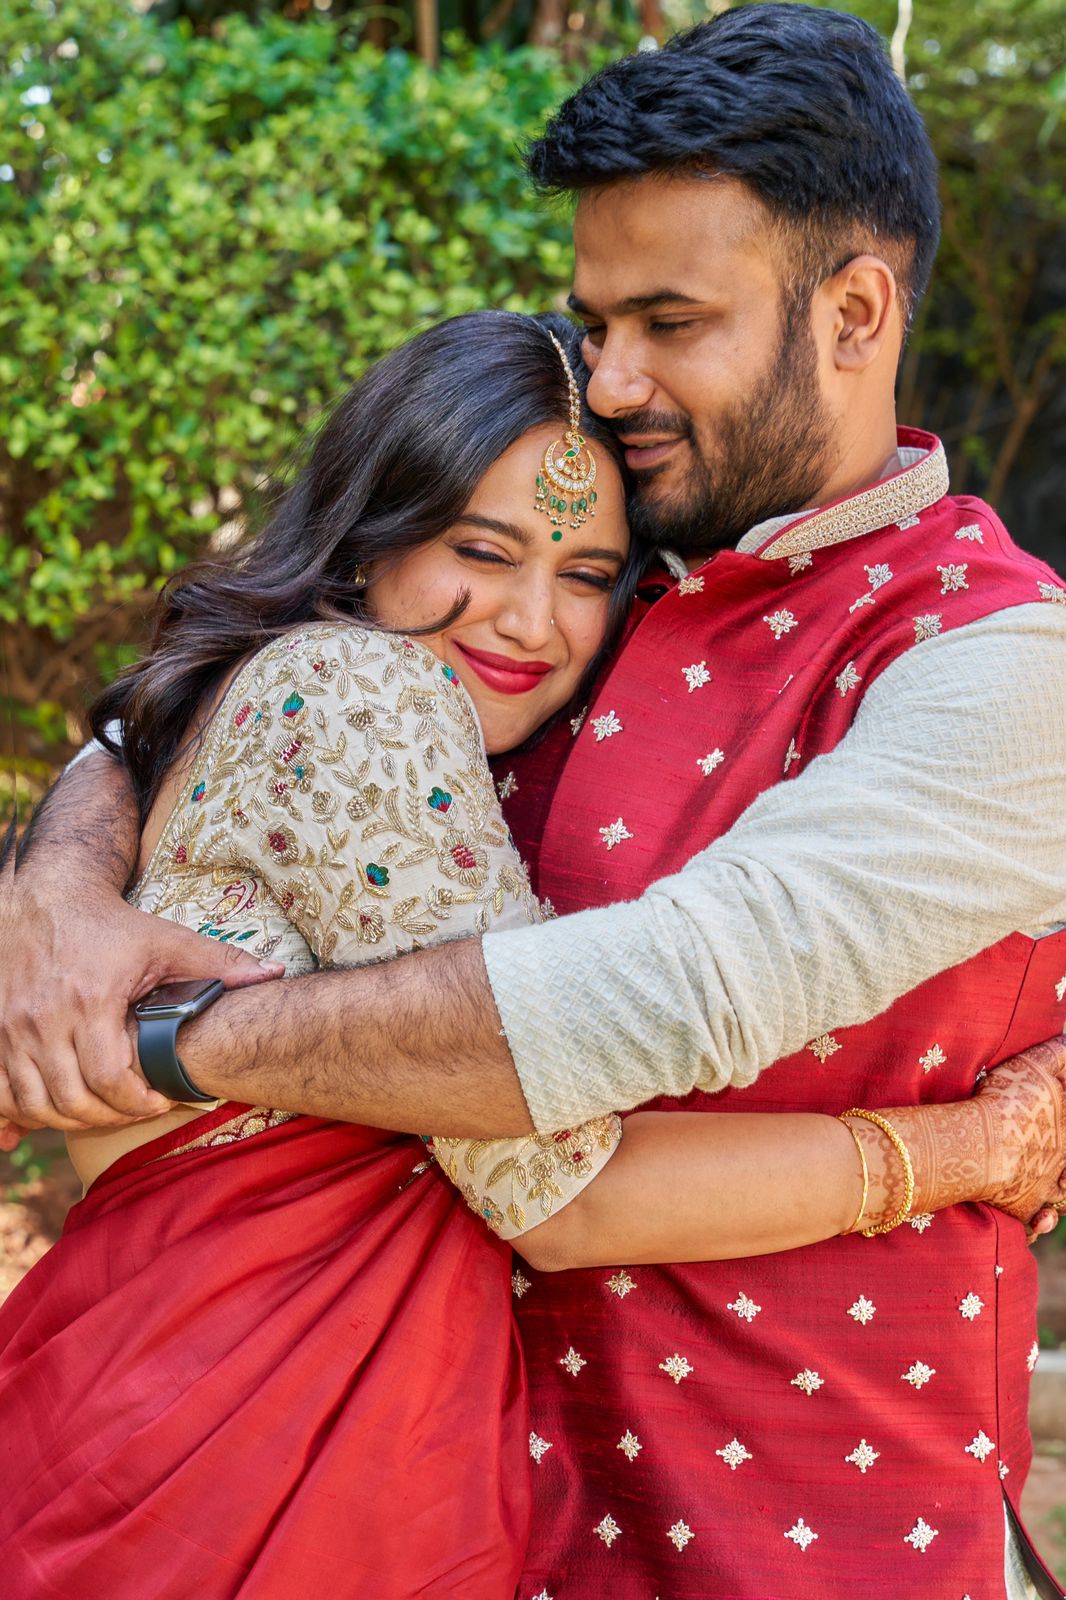 Pin by pavithra on photoshoot | Photo poses for couples, Engagement photography  poses, Indian wedding couple photography